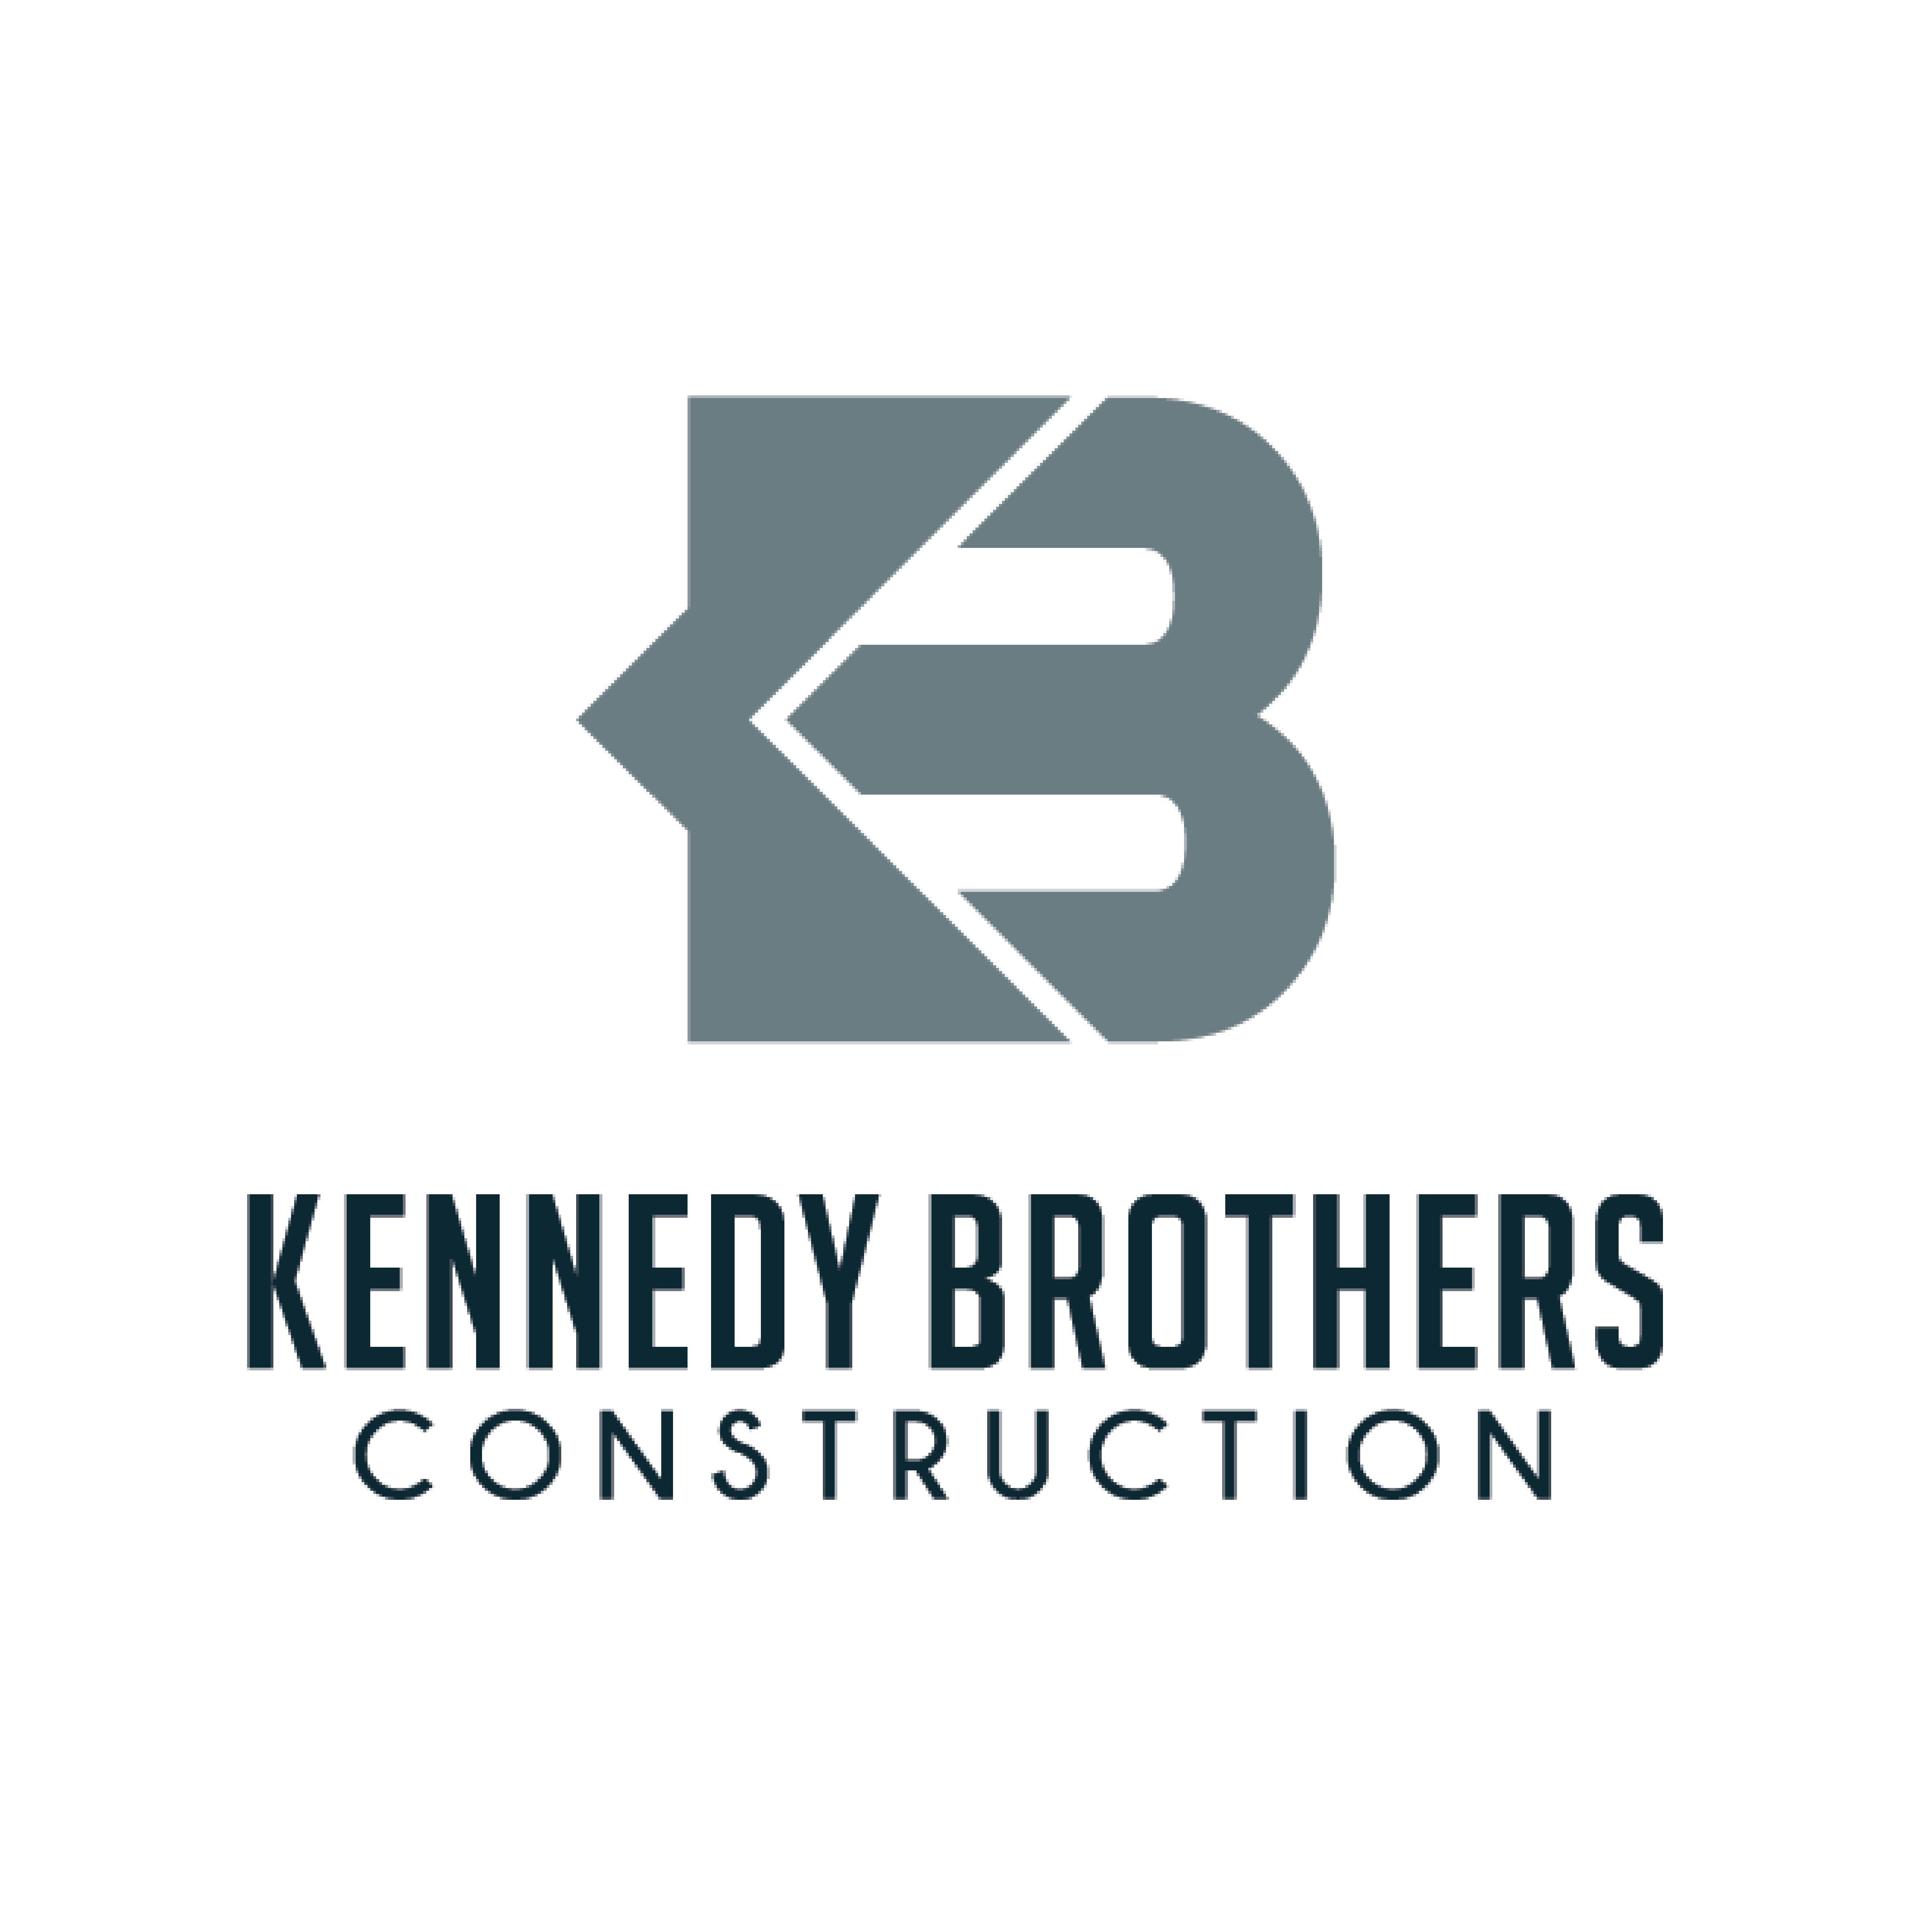 Kennedy Brothers Construction Logo